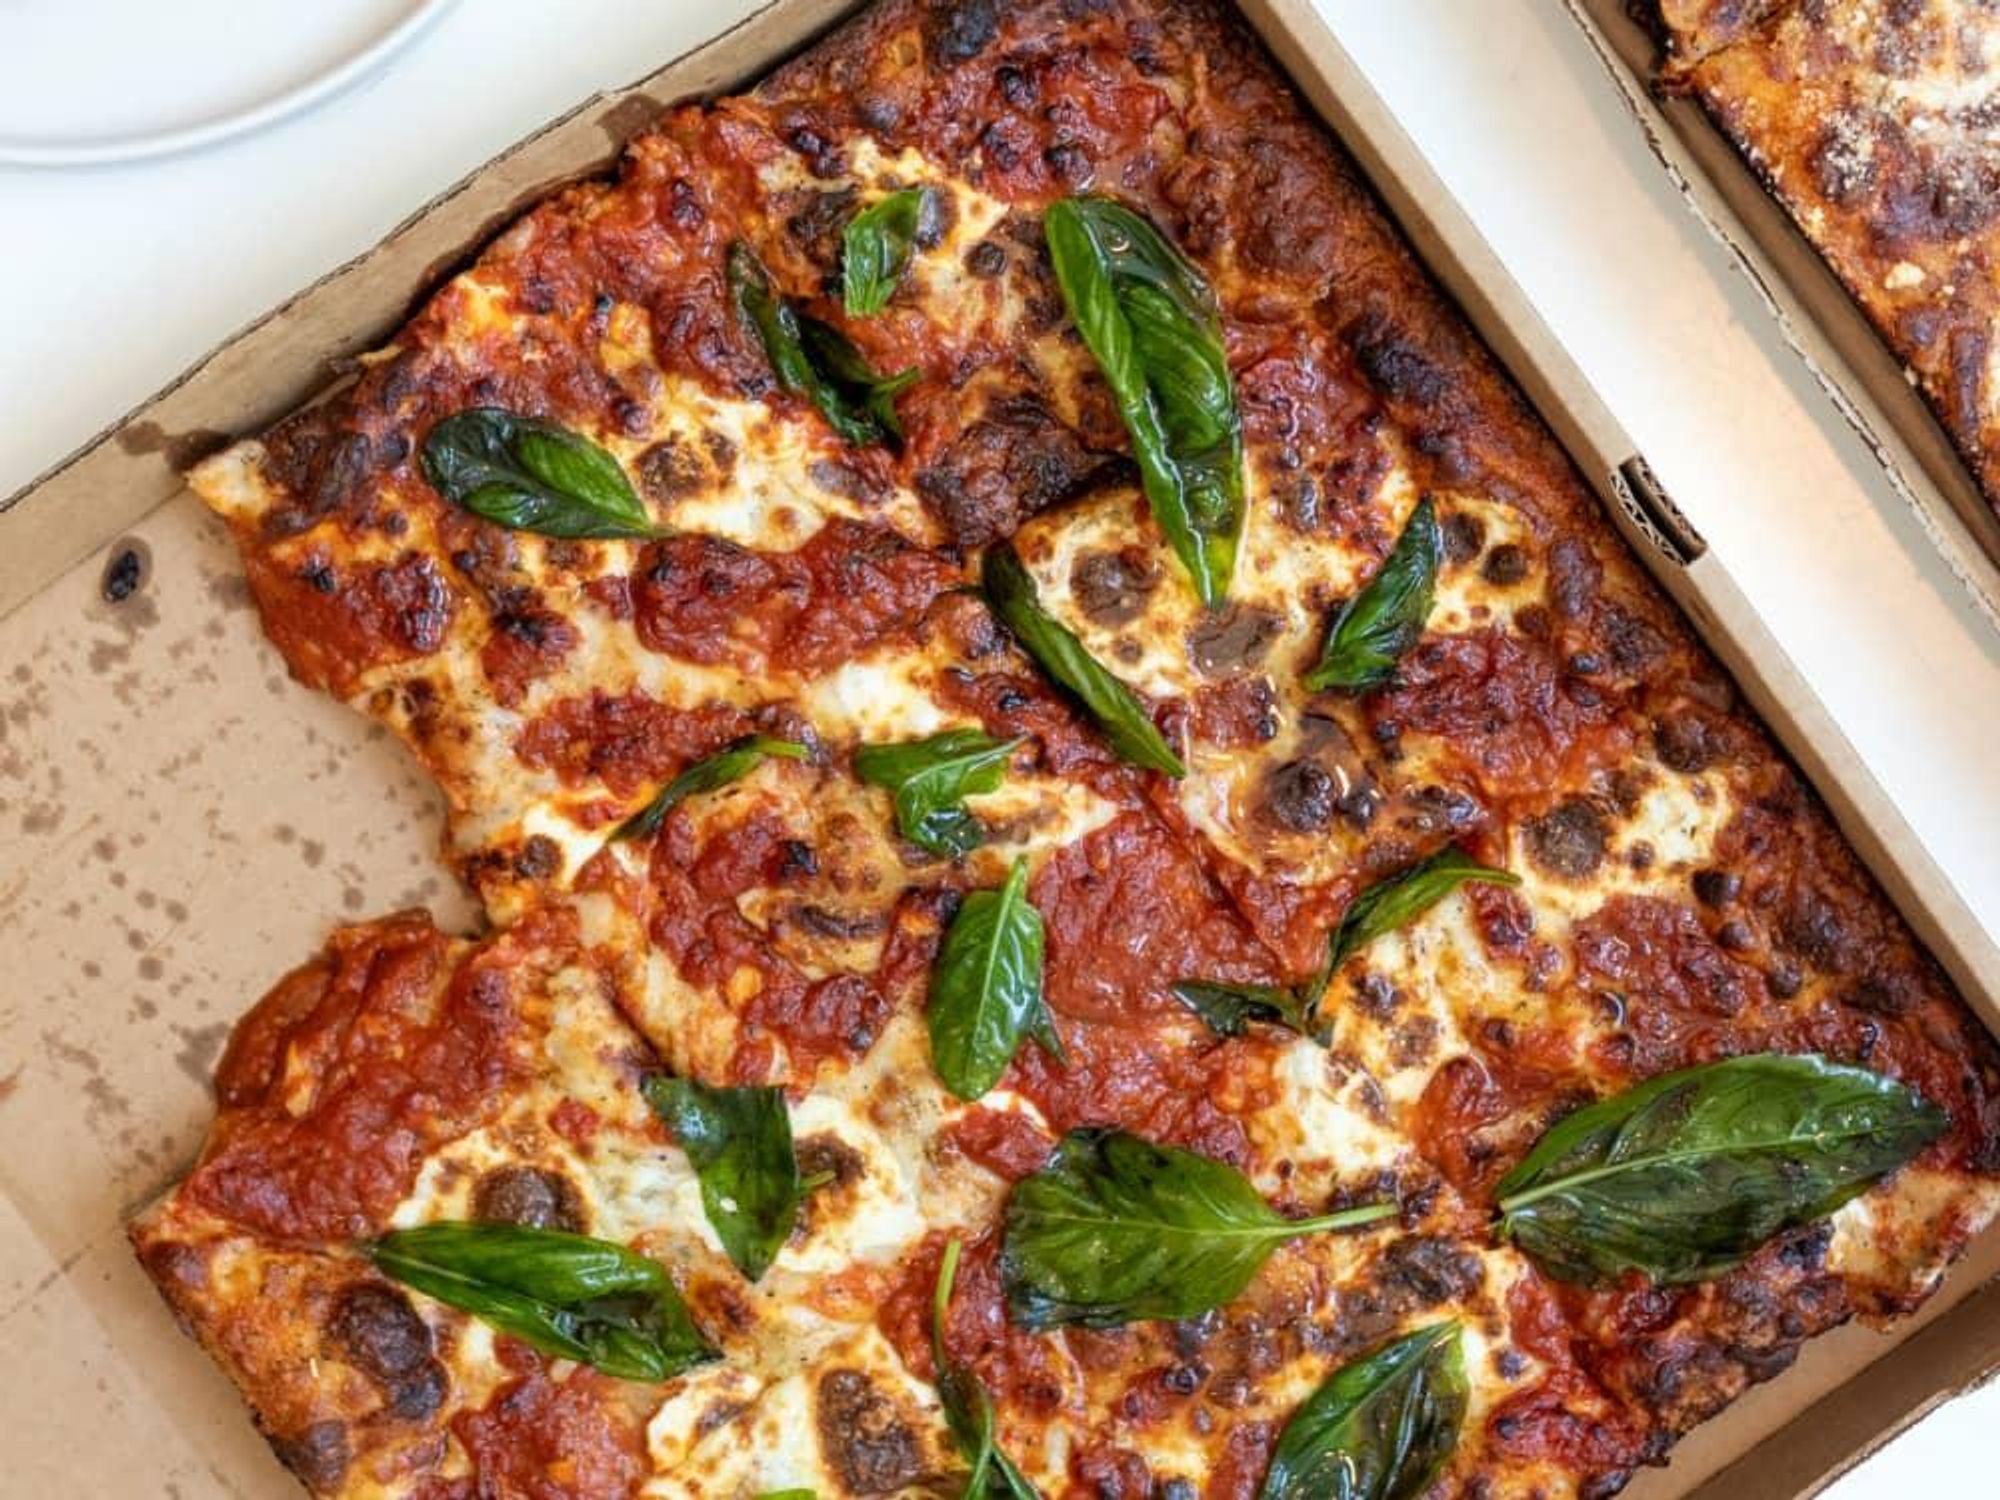 New York Sicilian Pizza - Sip and Feast